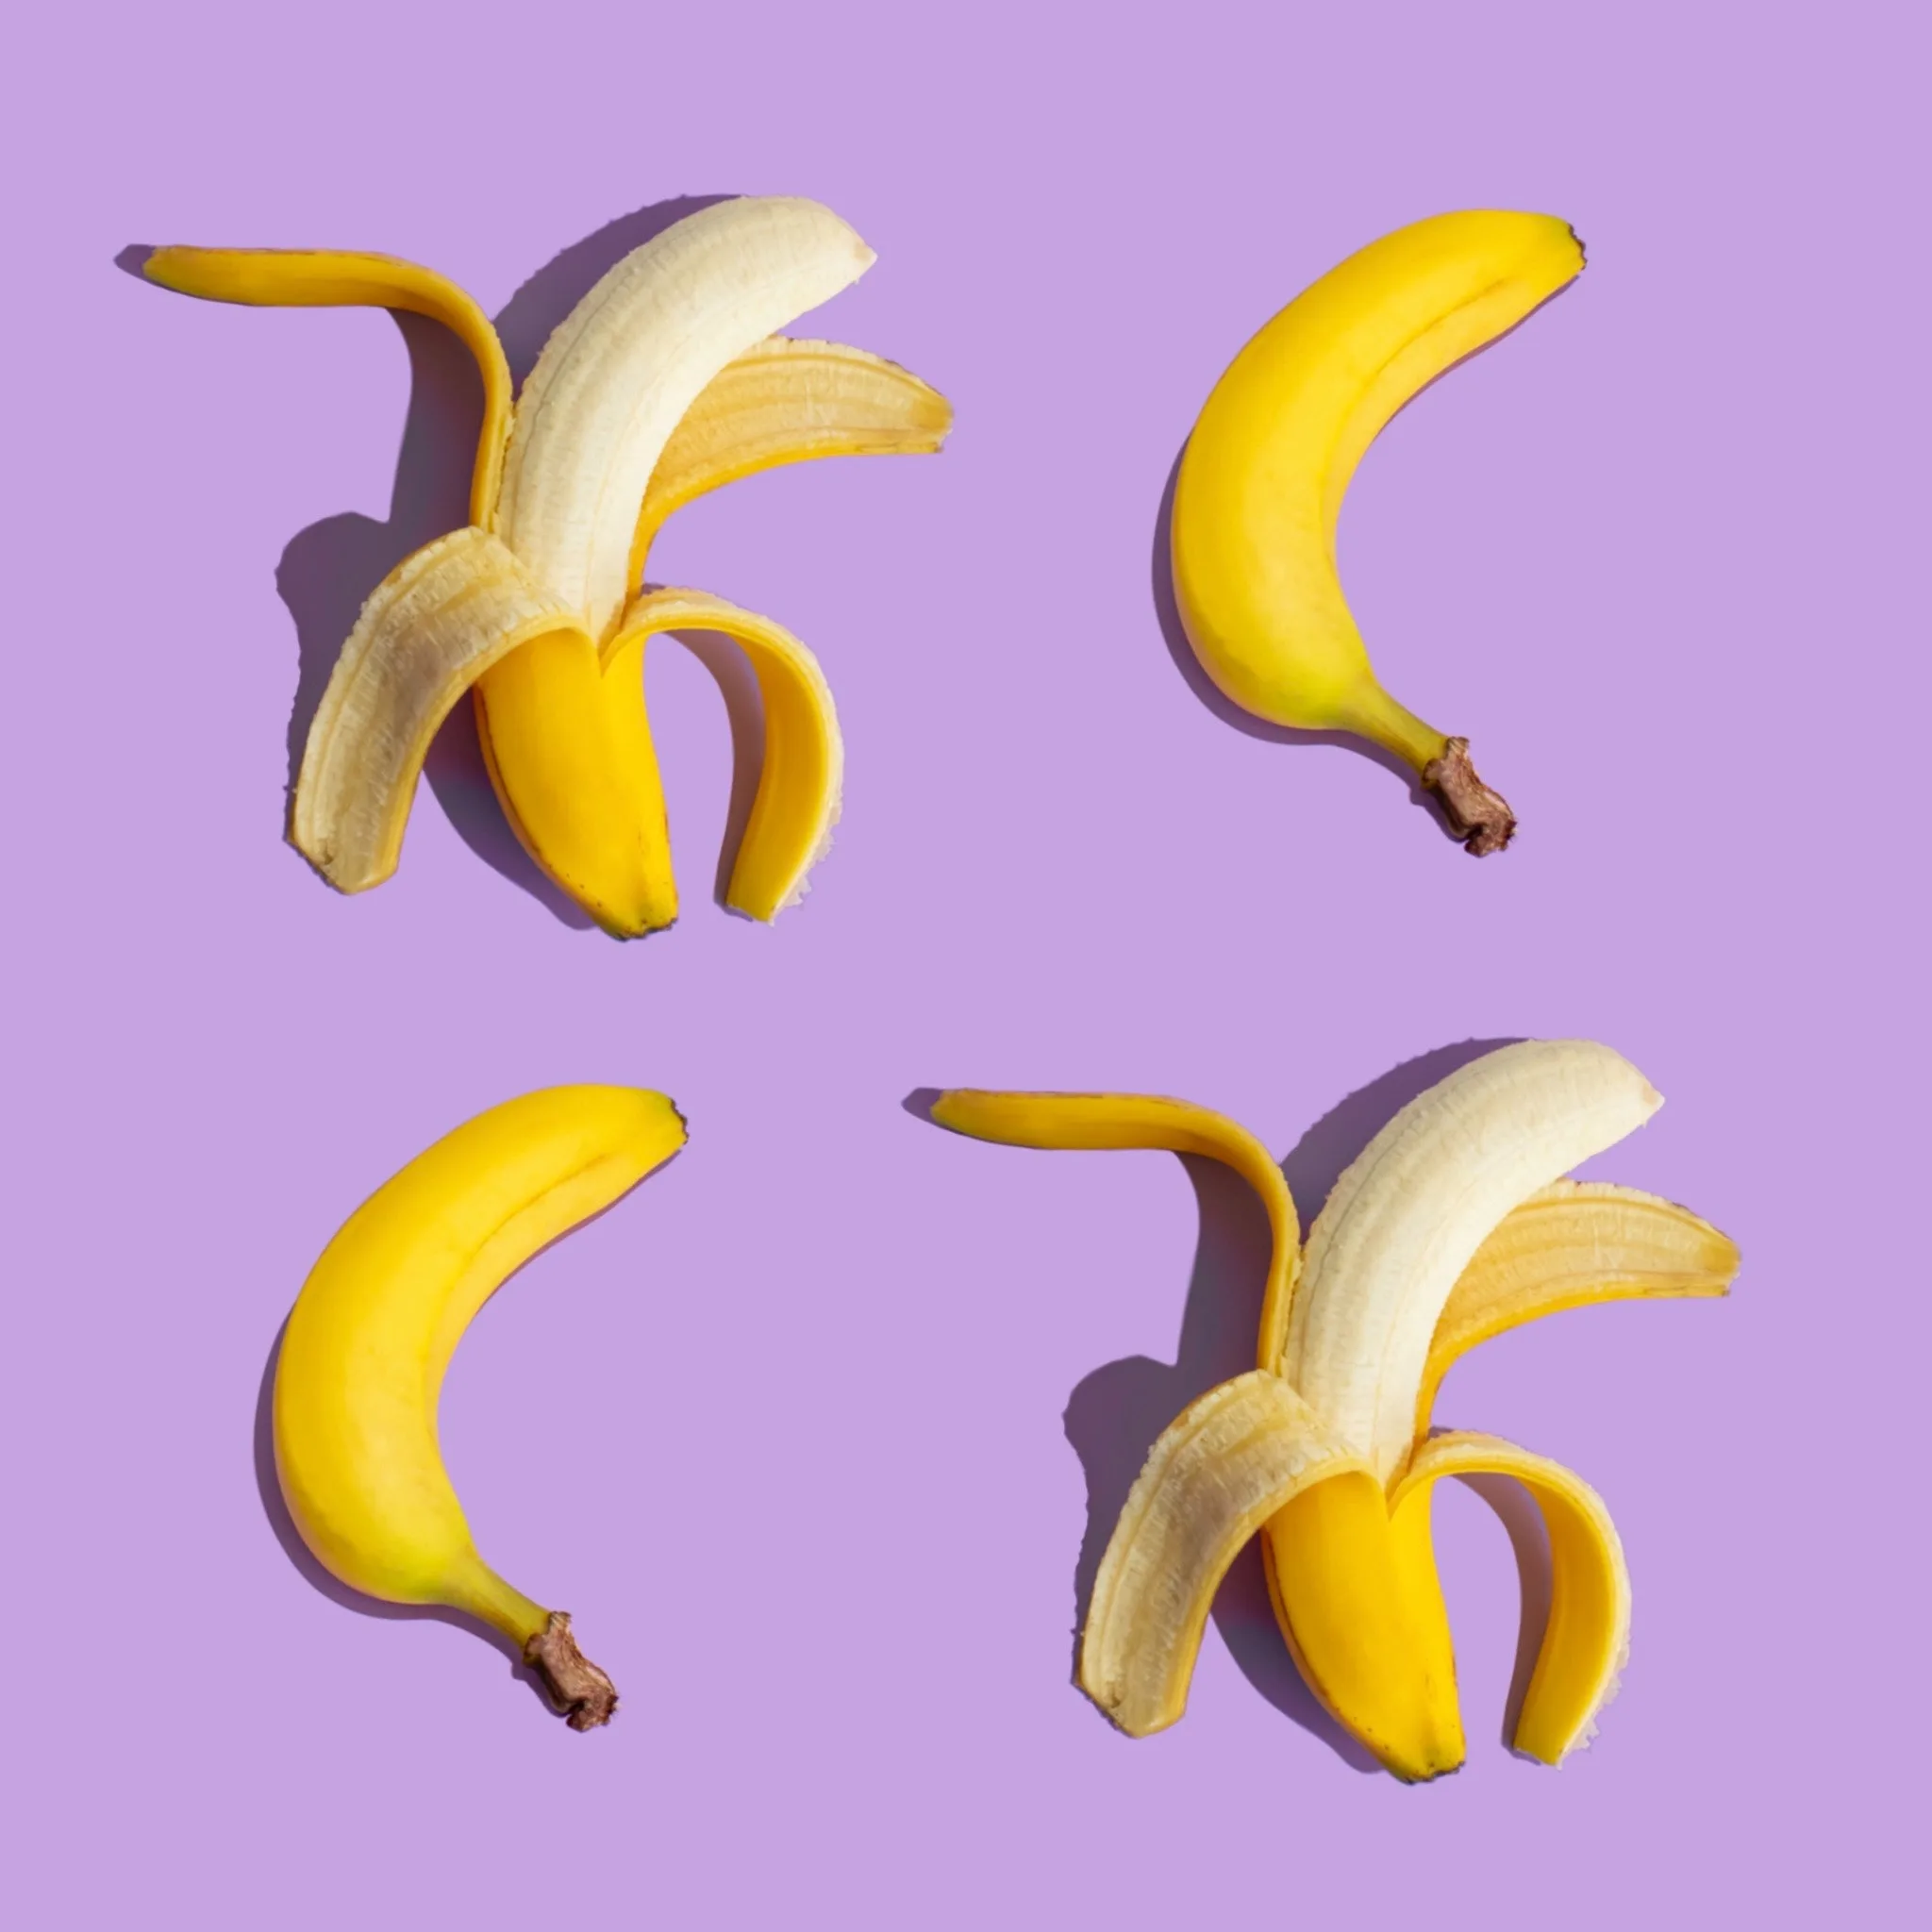 The Great Debate: Green Bananas vs Ripe Bananas - Which One is Better for Your Health?